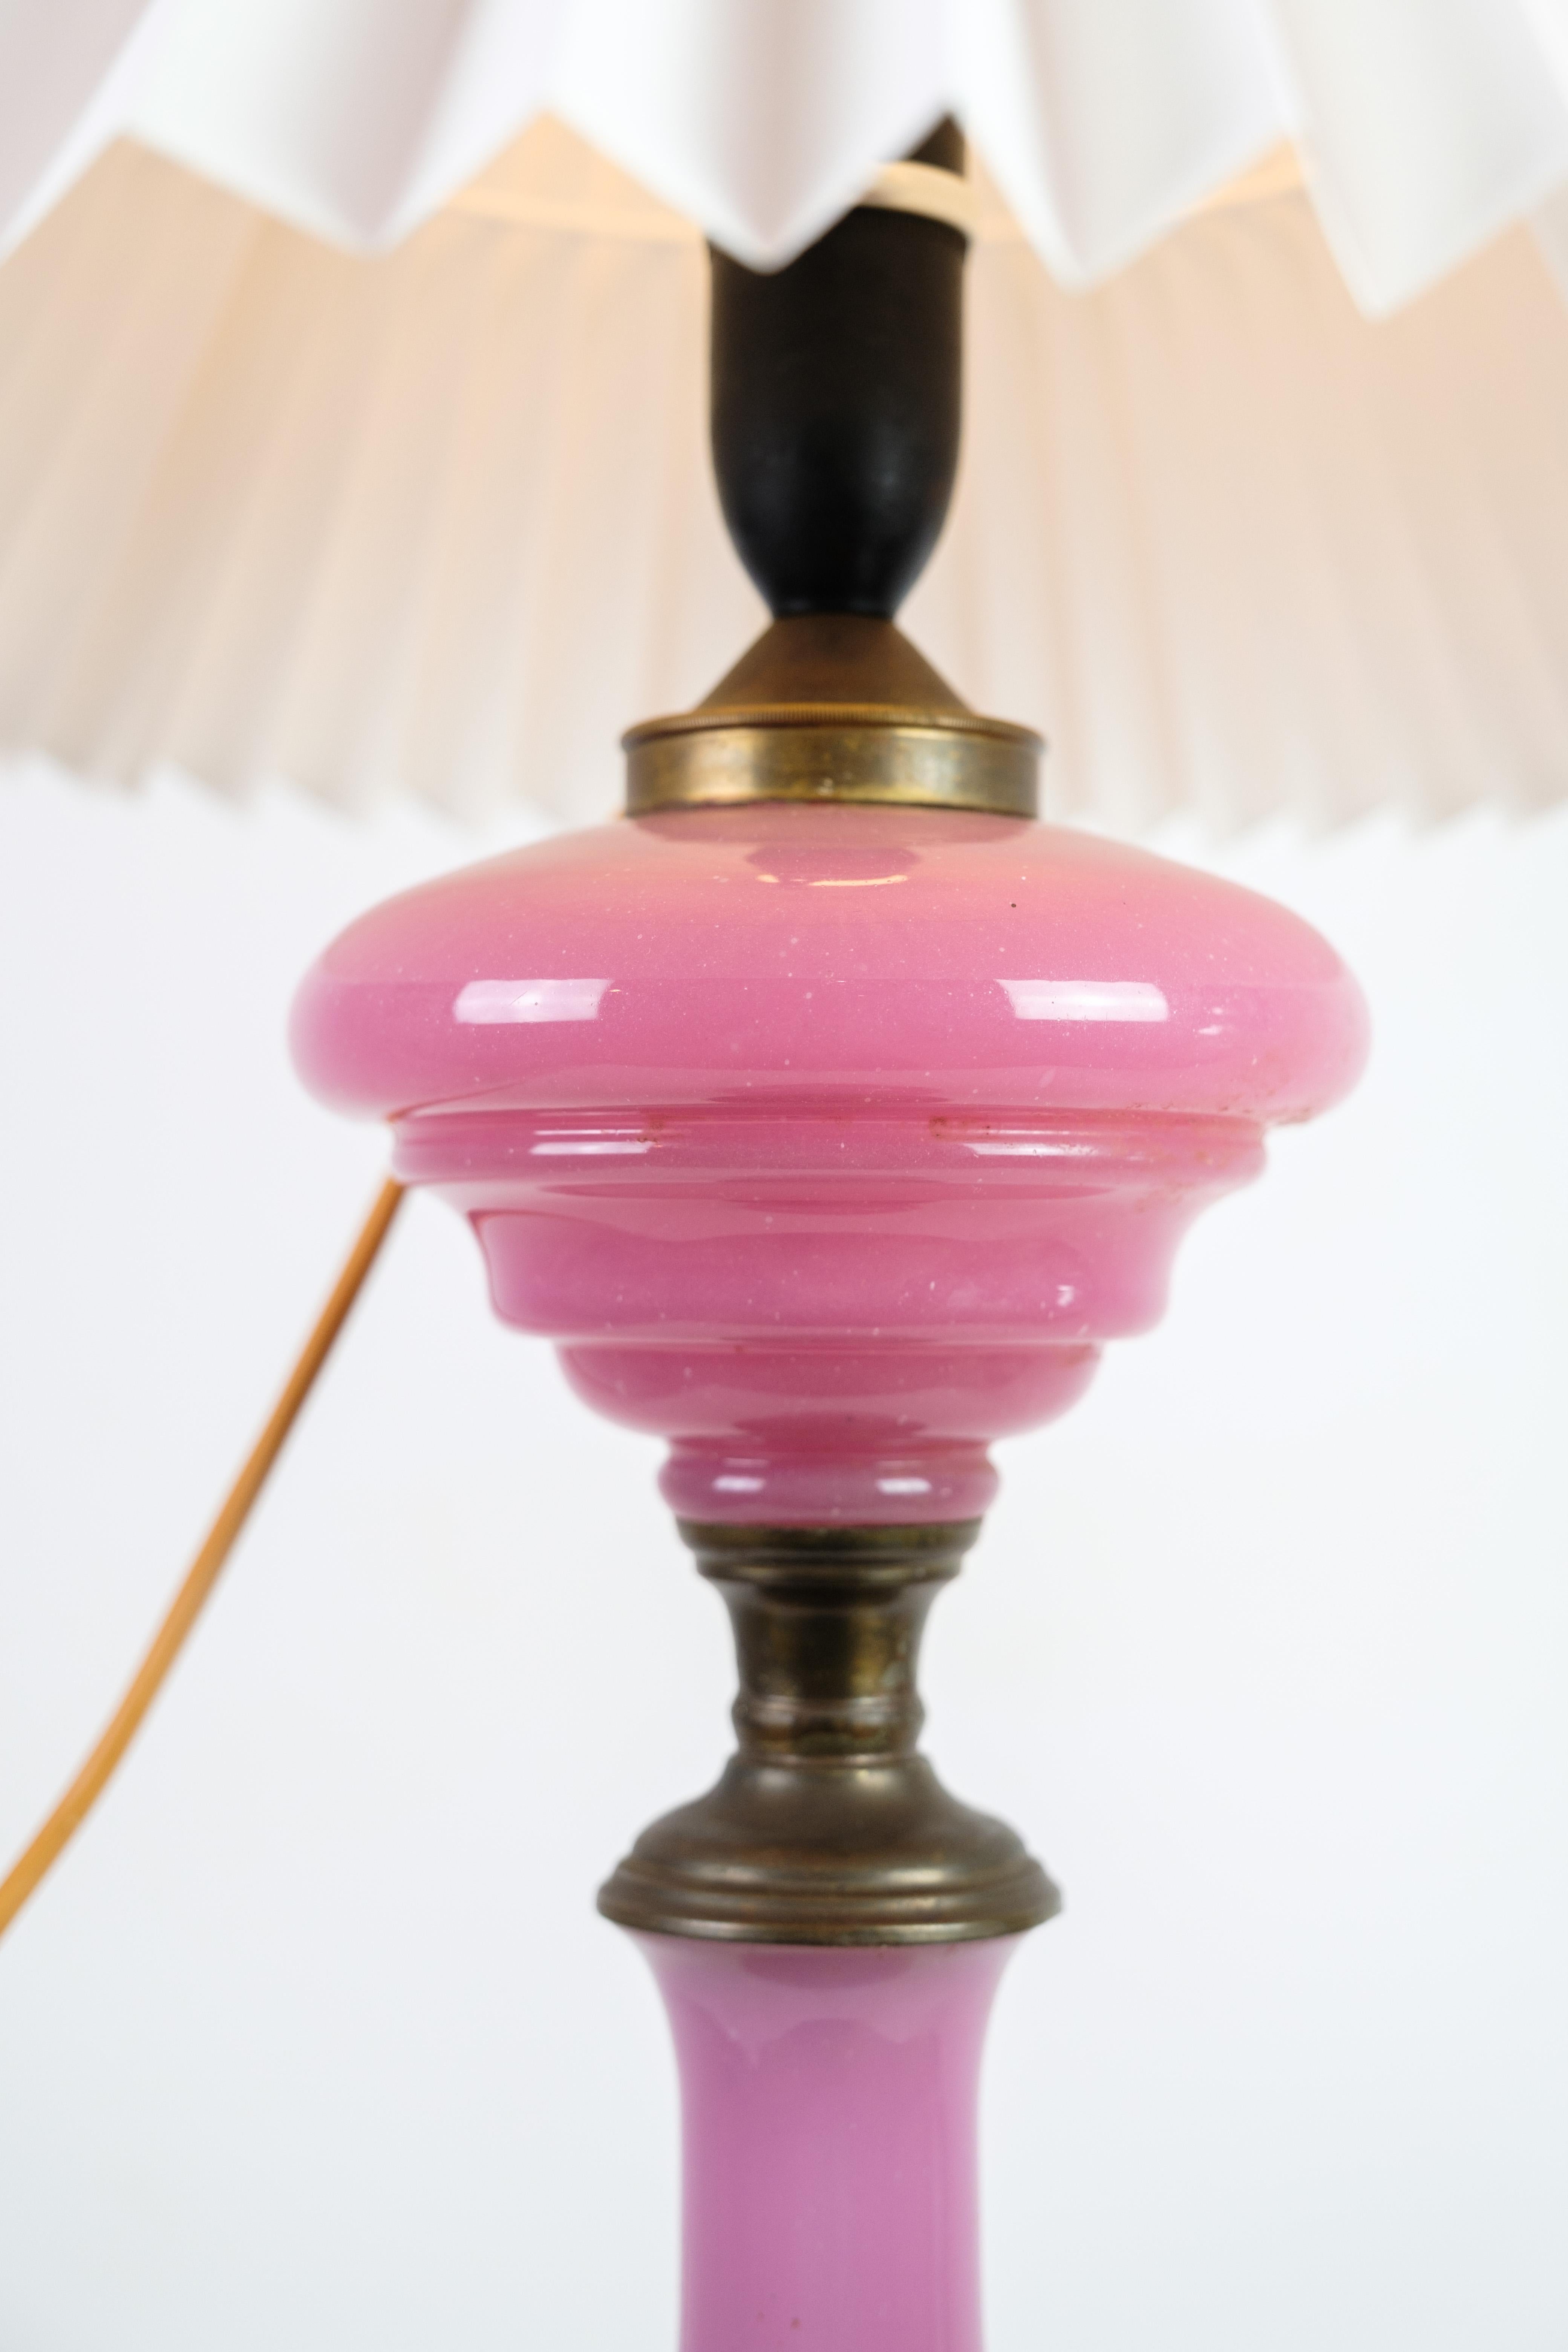 This table lamp is a beautiful example of design from the 1880s. The lamp has a frame of pink opaline glass, which is a type of glass known for its beautiful and characteristic colour. The lamp has a white lampshade. The base is made of brass, which